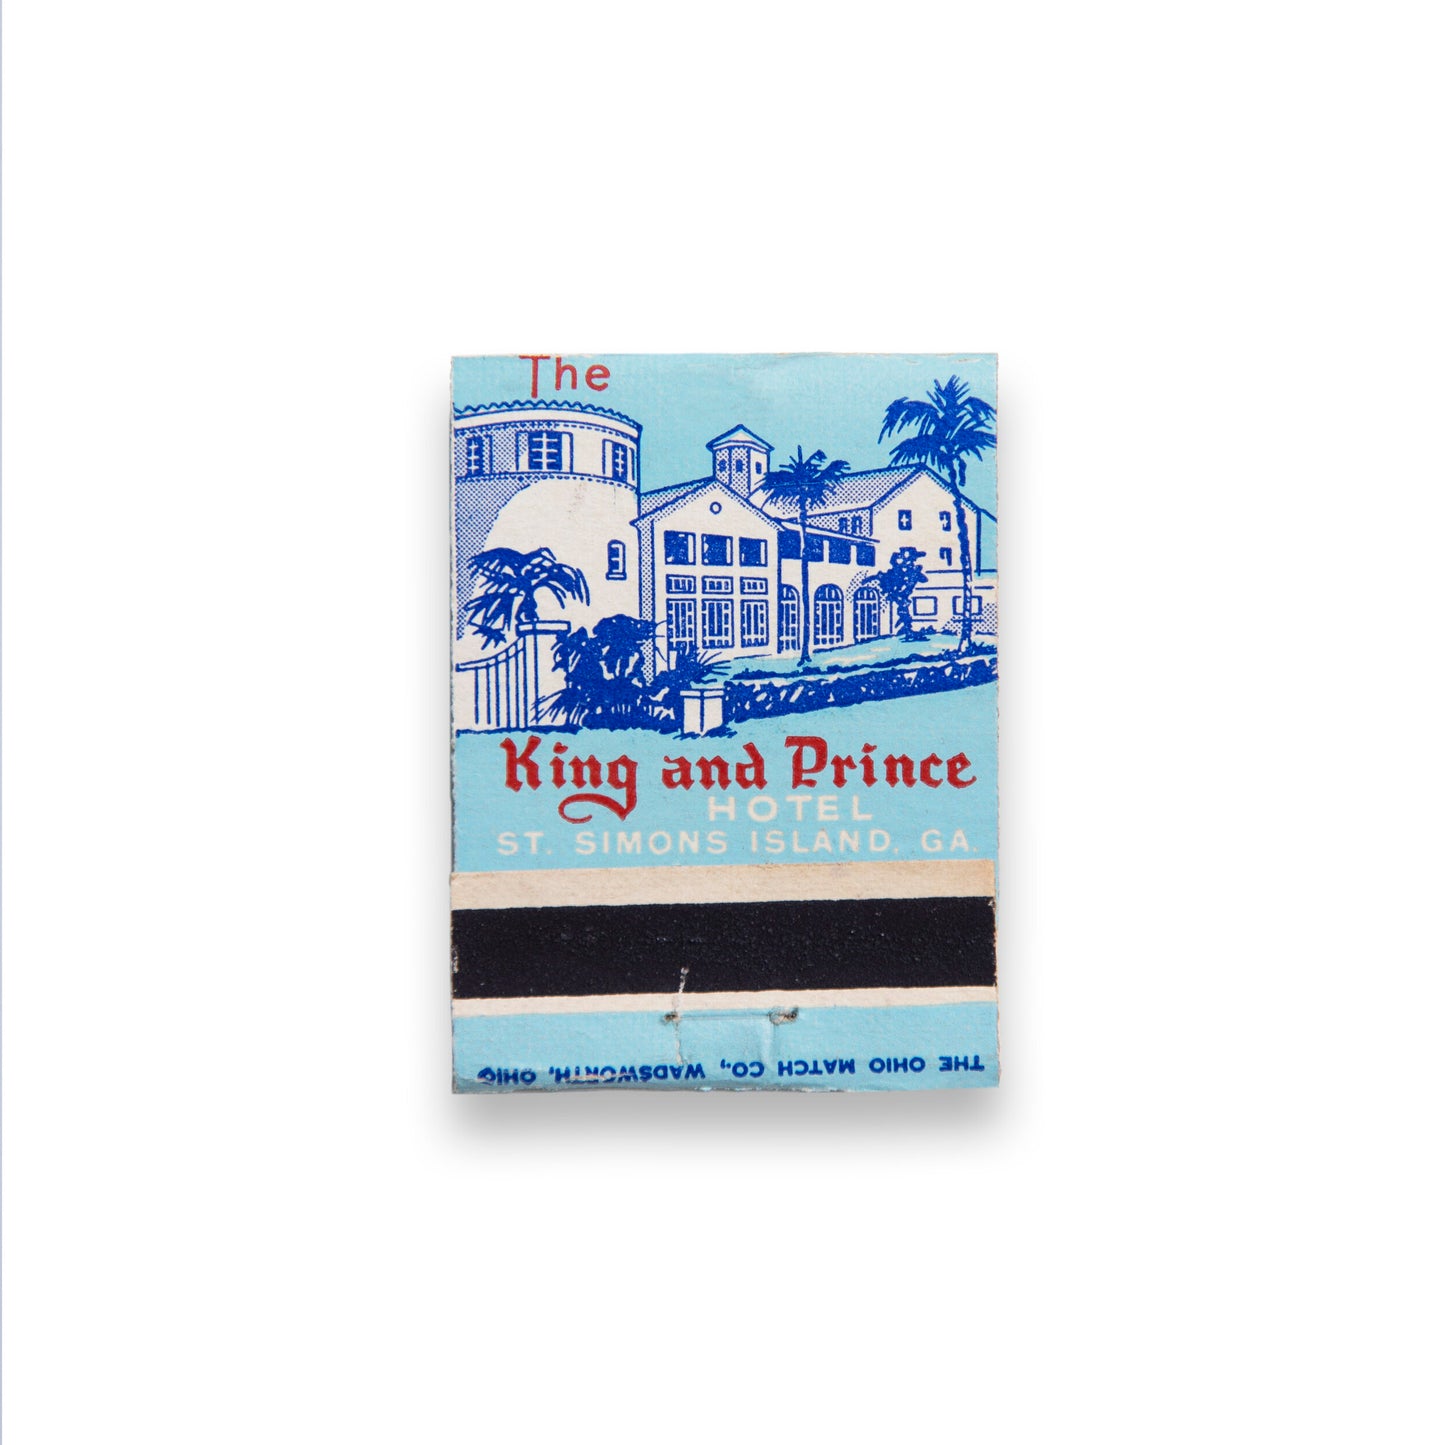 The King and Prince Hotel